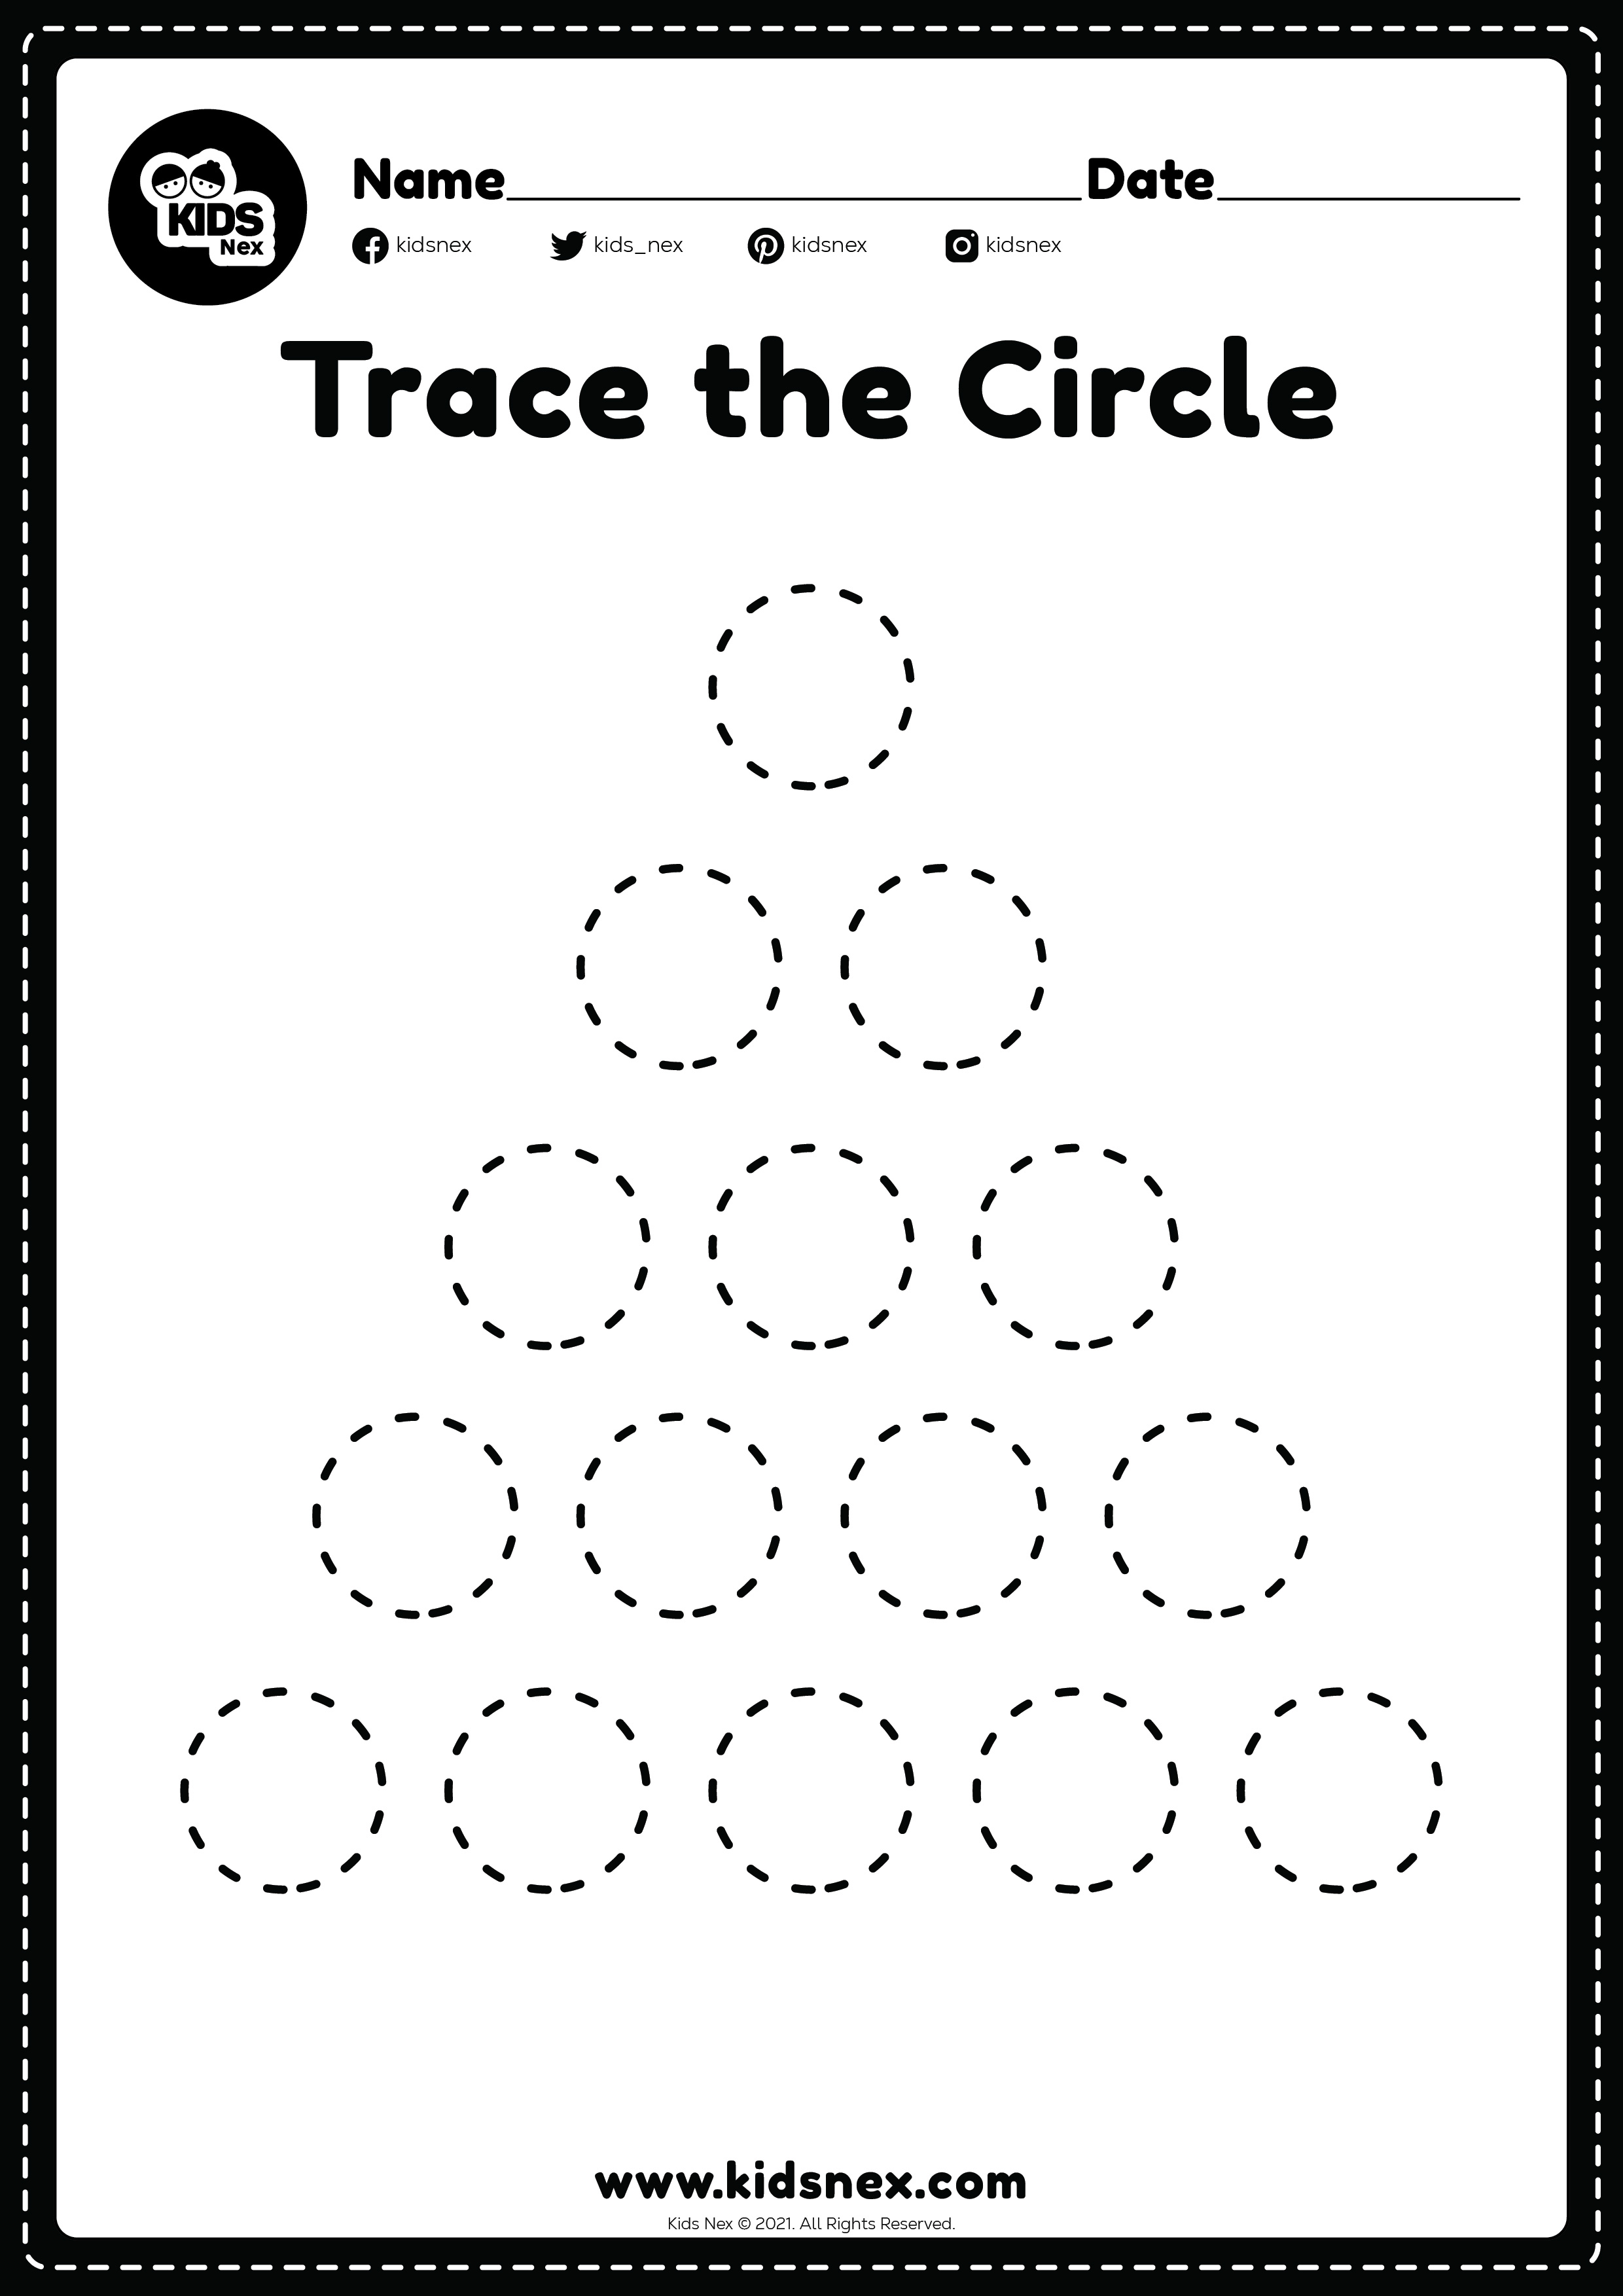 Tracing circles worksheet printable free PDF file format for trace sheet for kindergarten and preschooler kids for learning and educational activities.